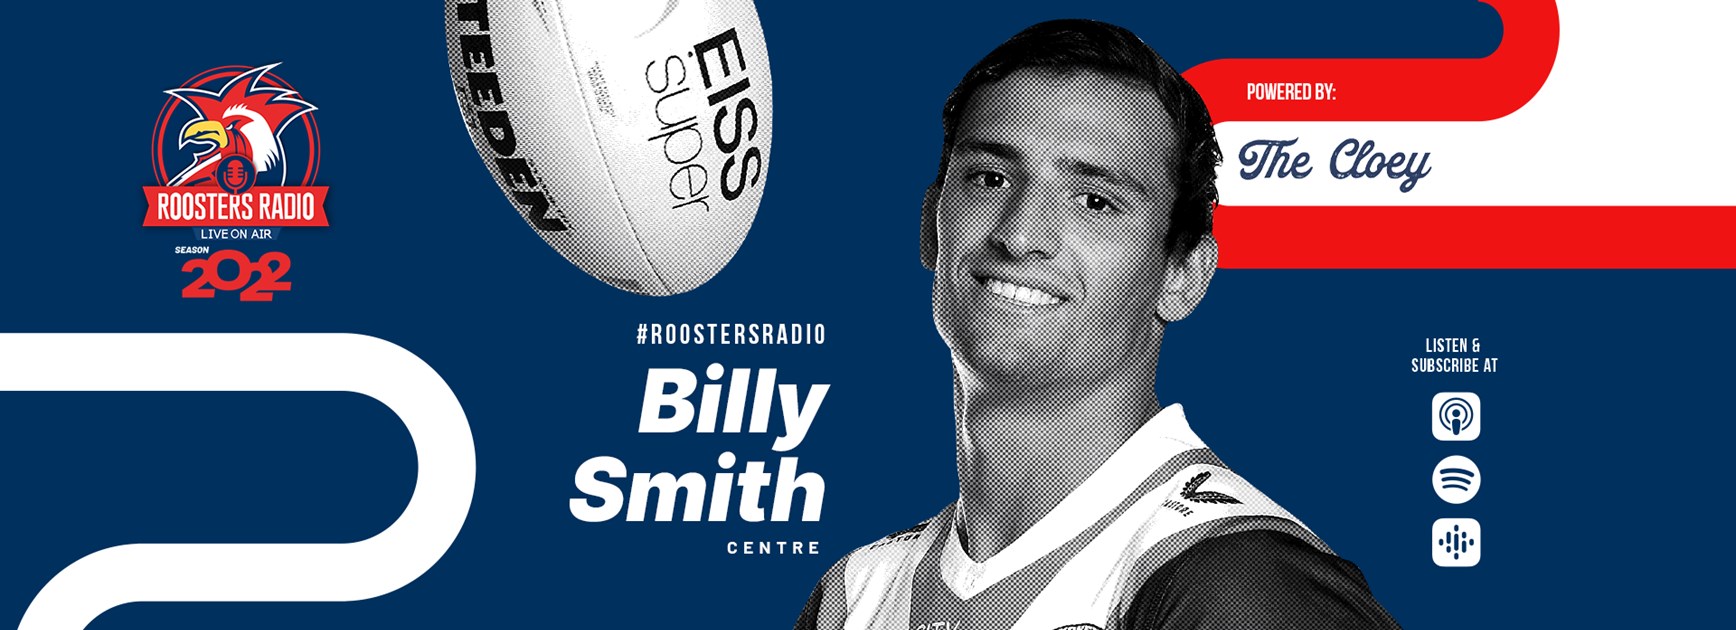 Roosters Radio Ep 132: Billy Smith